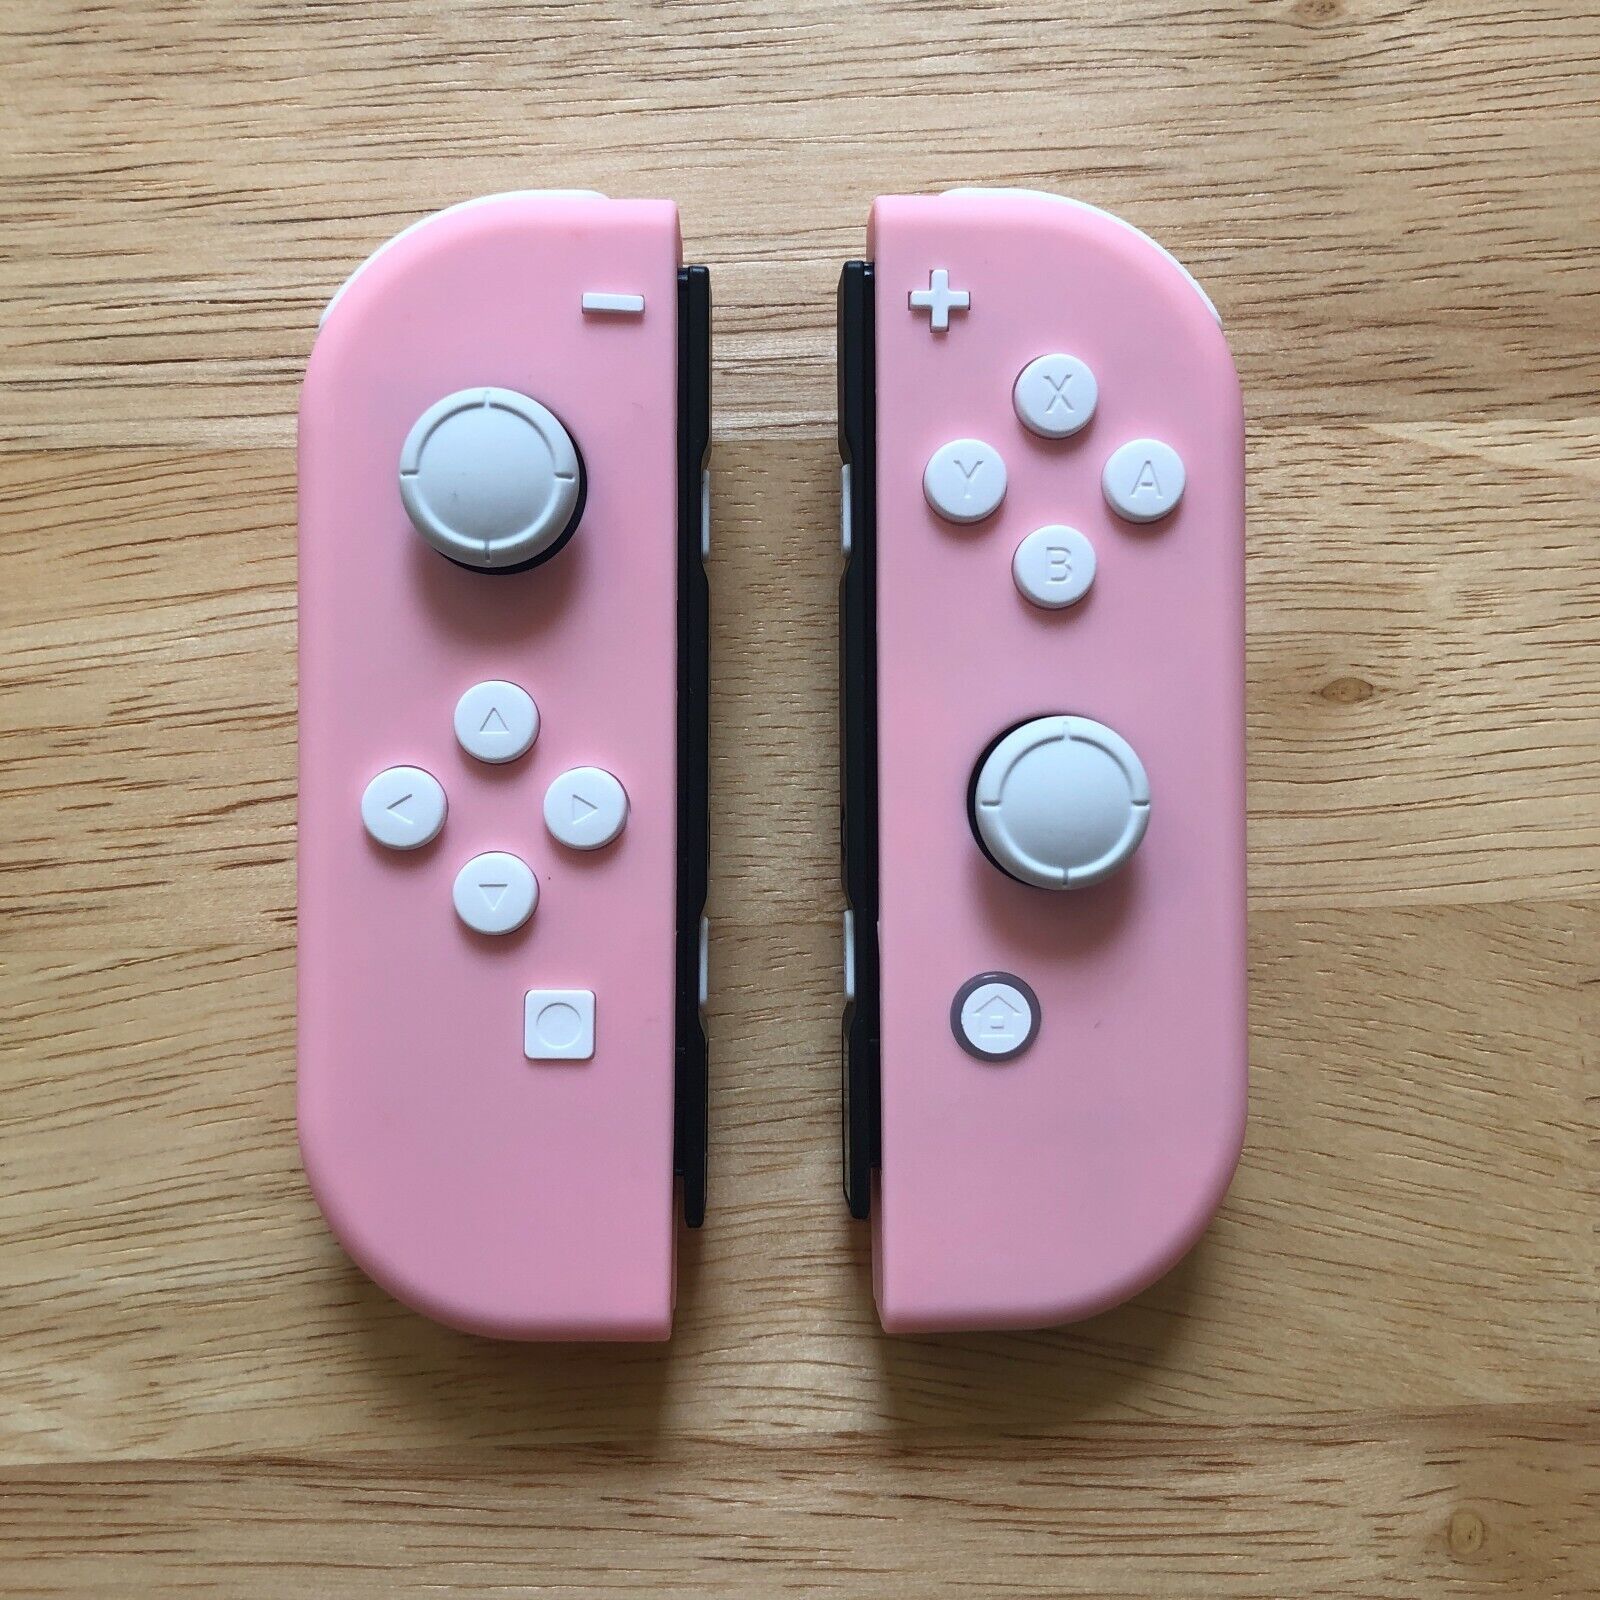 Custom Nintendo Switch Soft Pink Joy Con Controllers With A White Button Set